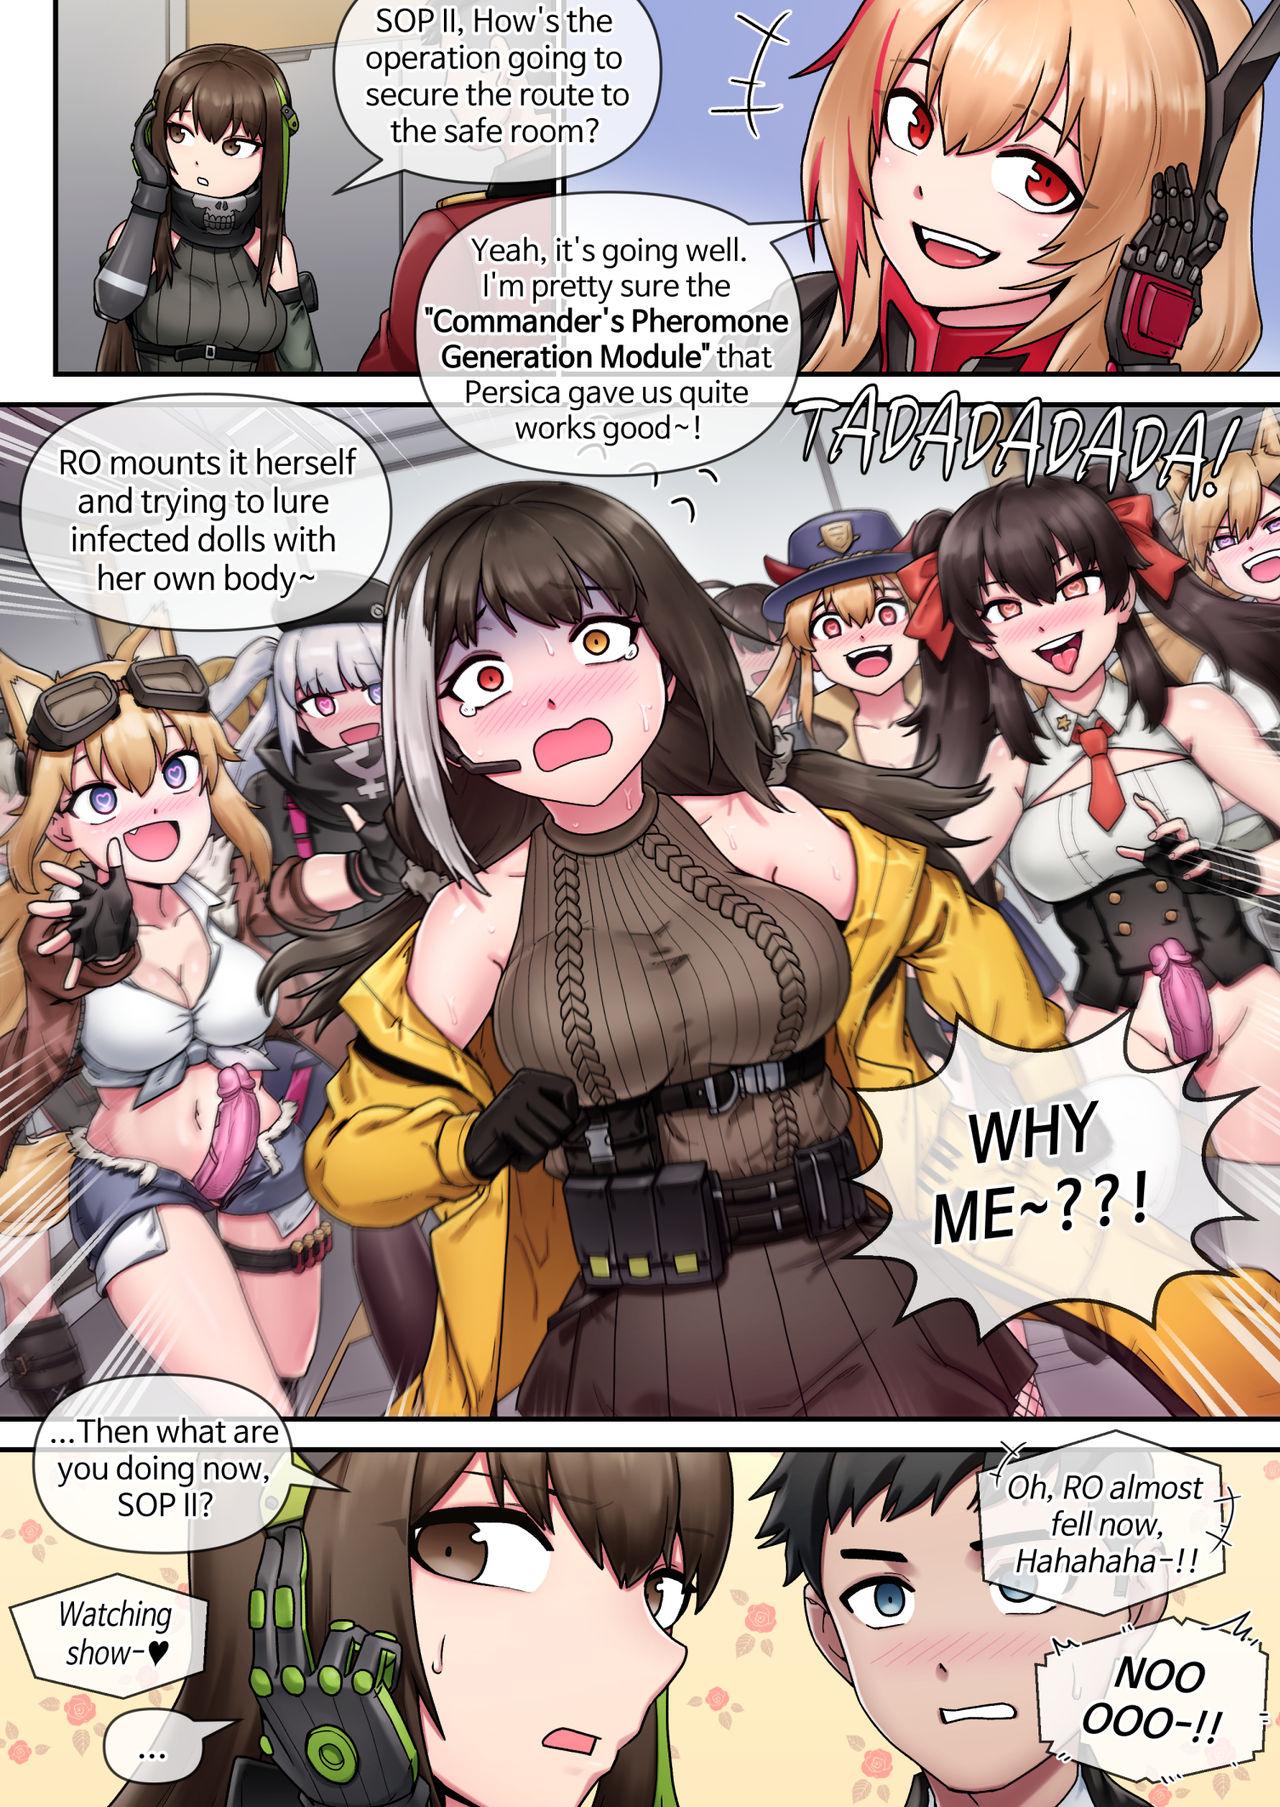 Girlongirl My Only Princess - Girls frontline Interracial Porn - Page 5